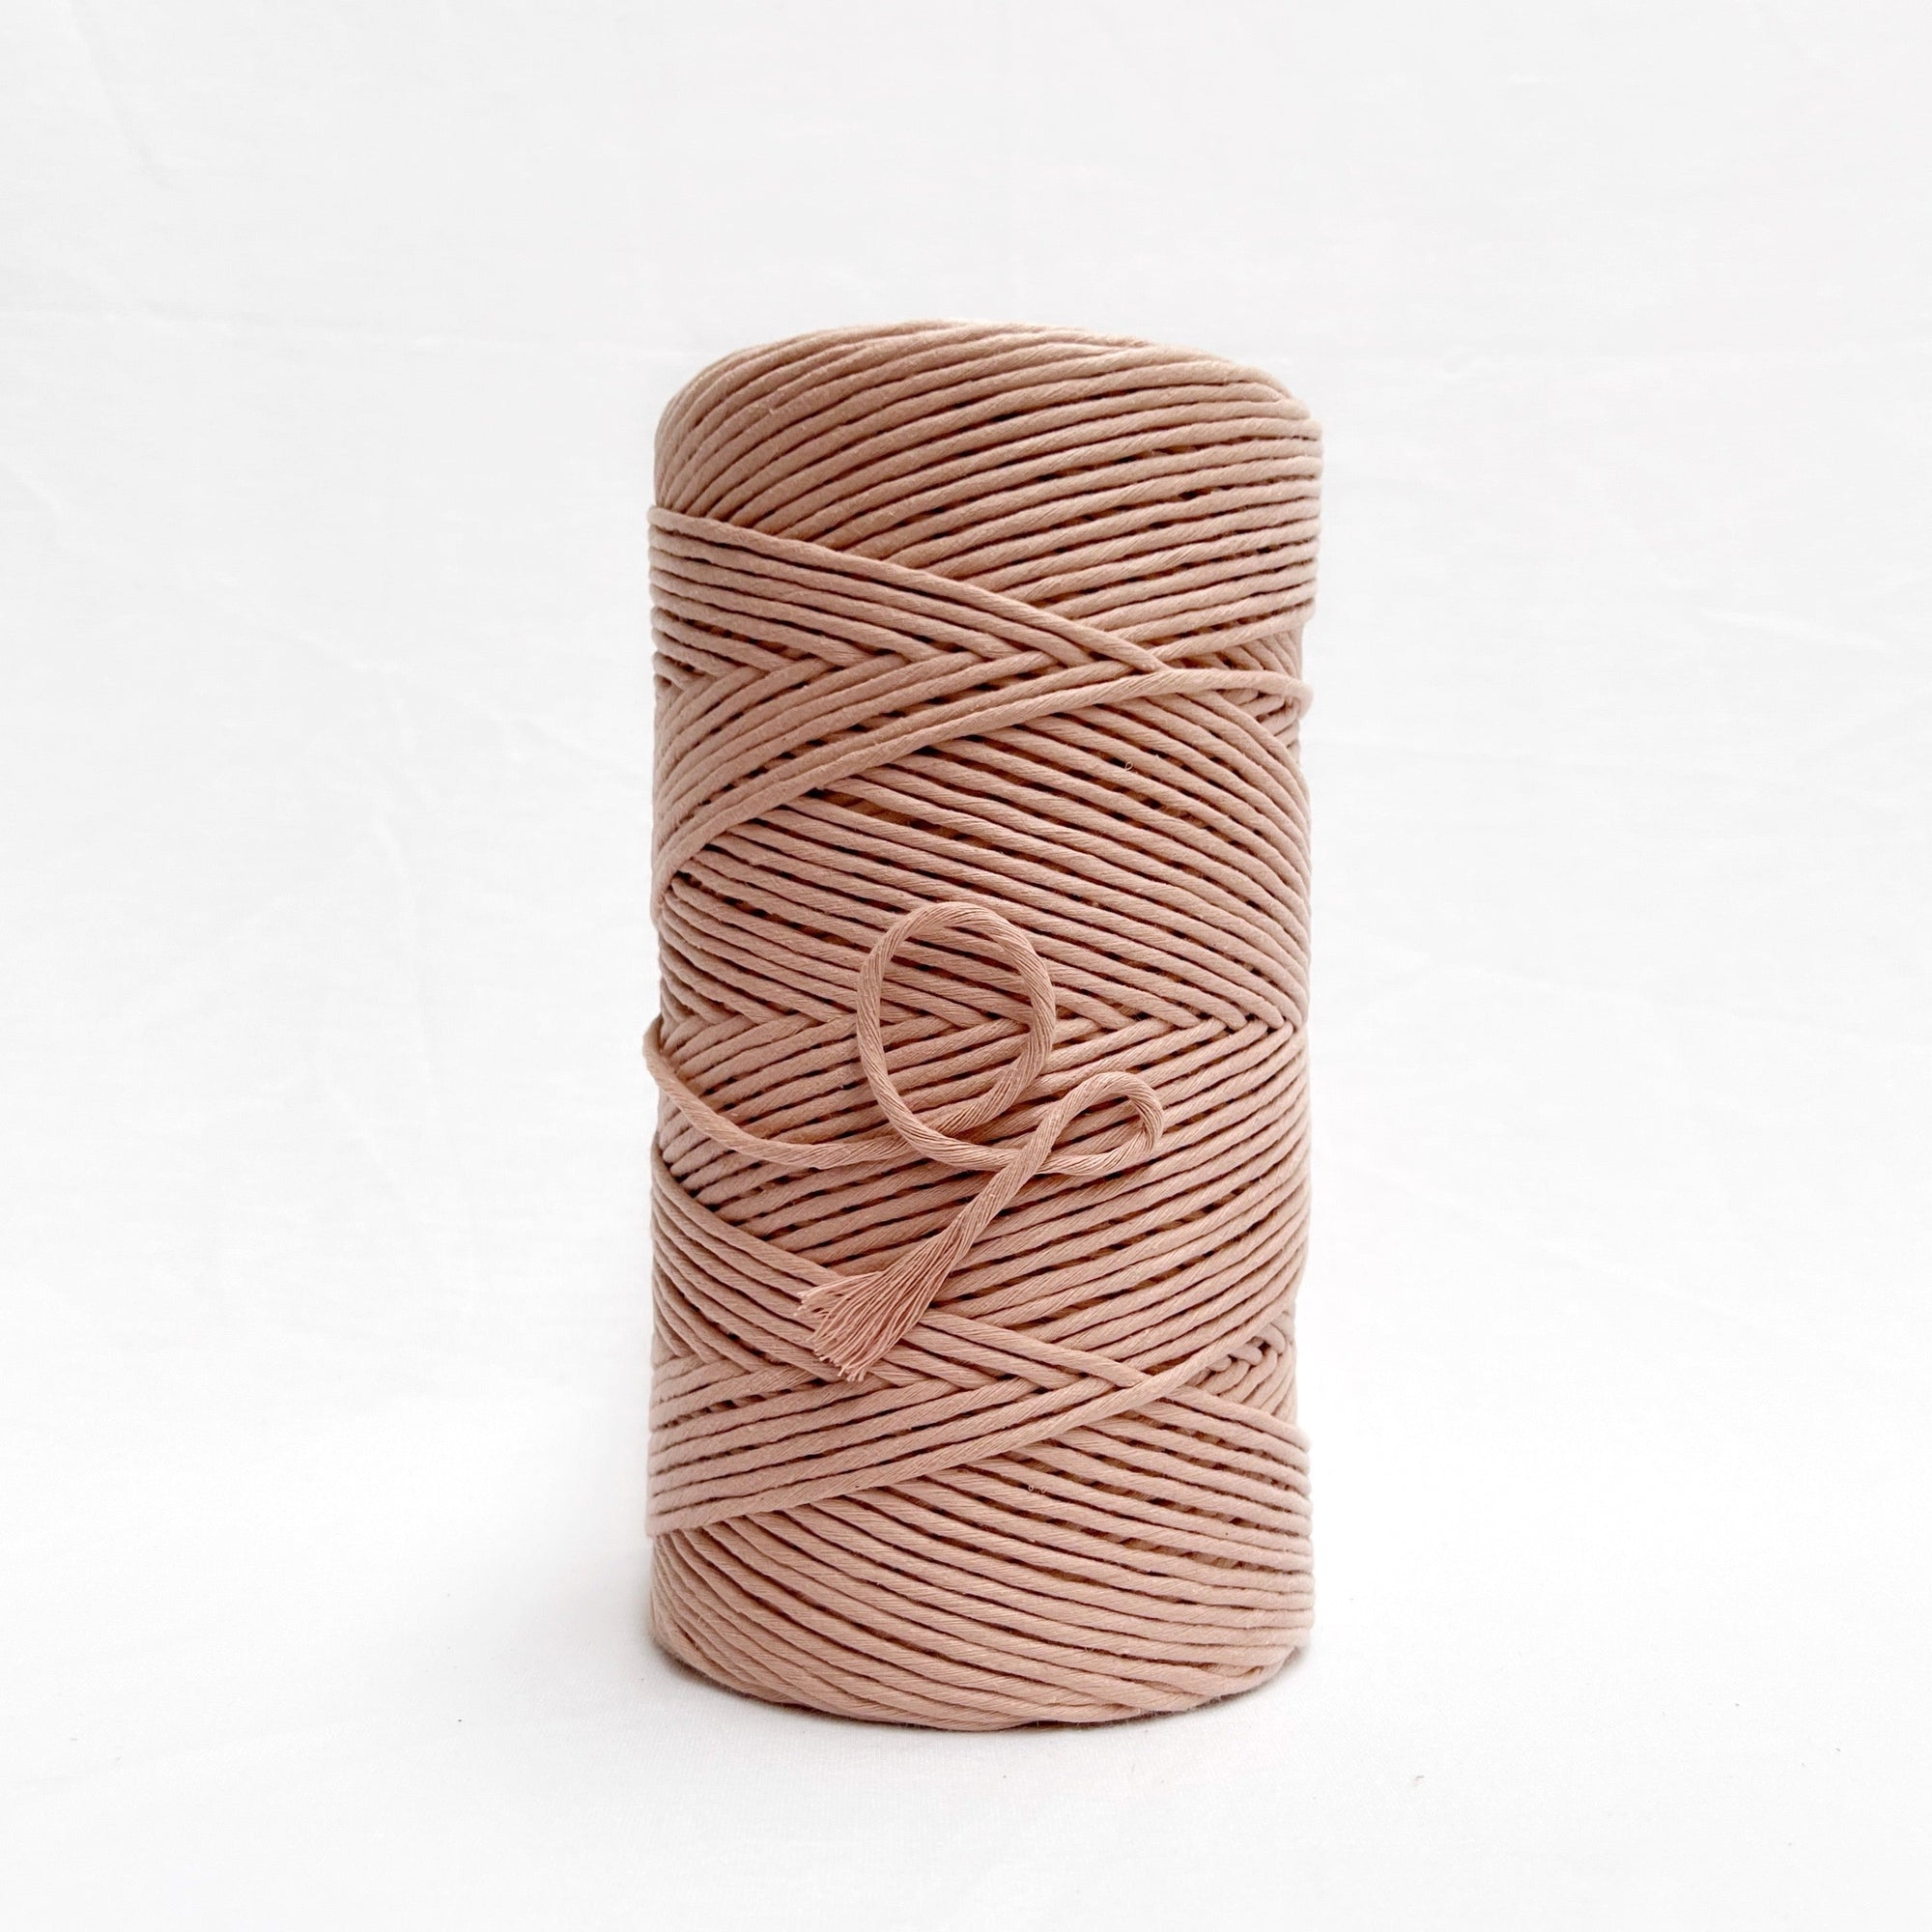 mary maker studio 1kg 5mm recycled cotton macrame string in neutral pink sand colour suitable for macrame workshops beginners and advanced artists